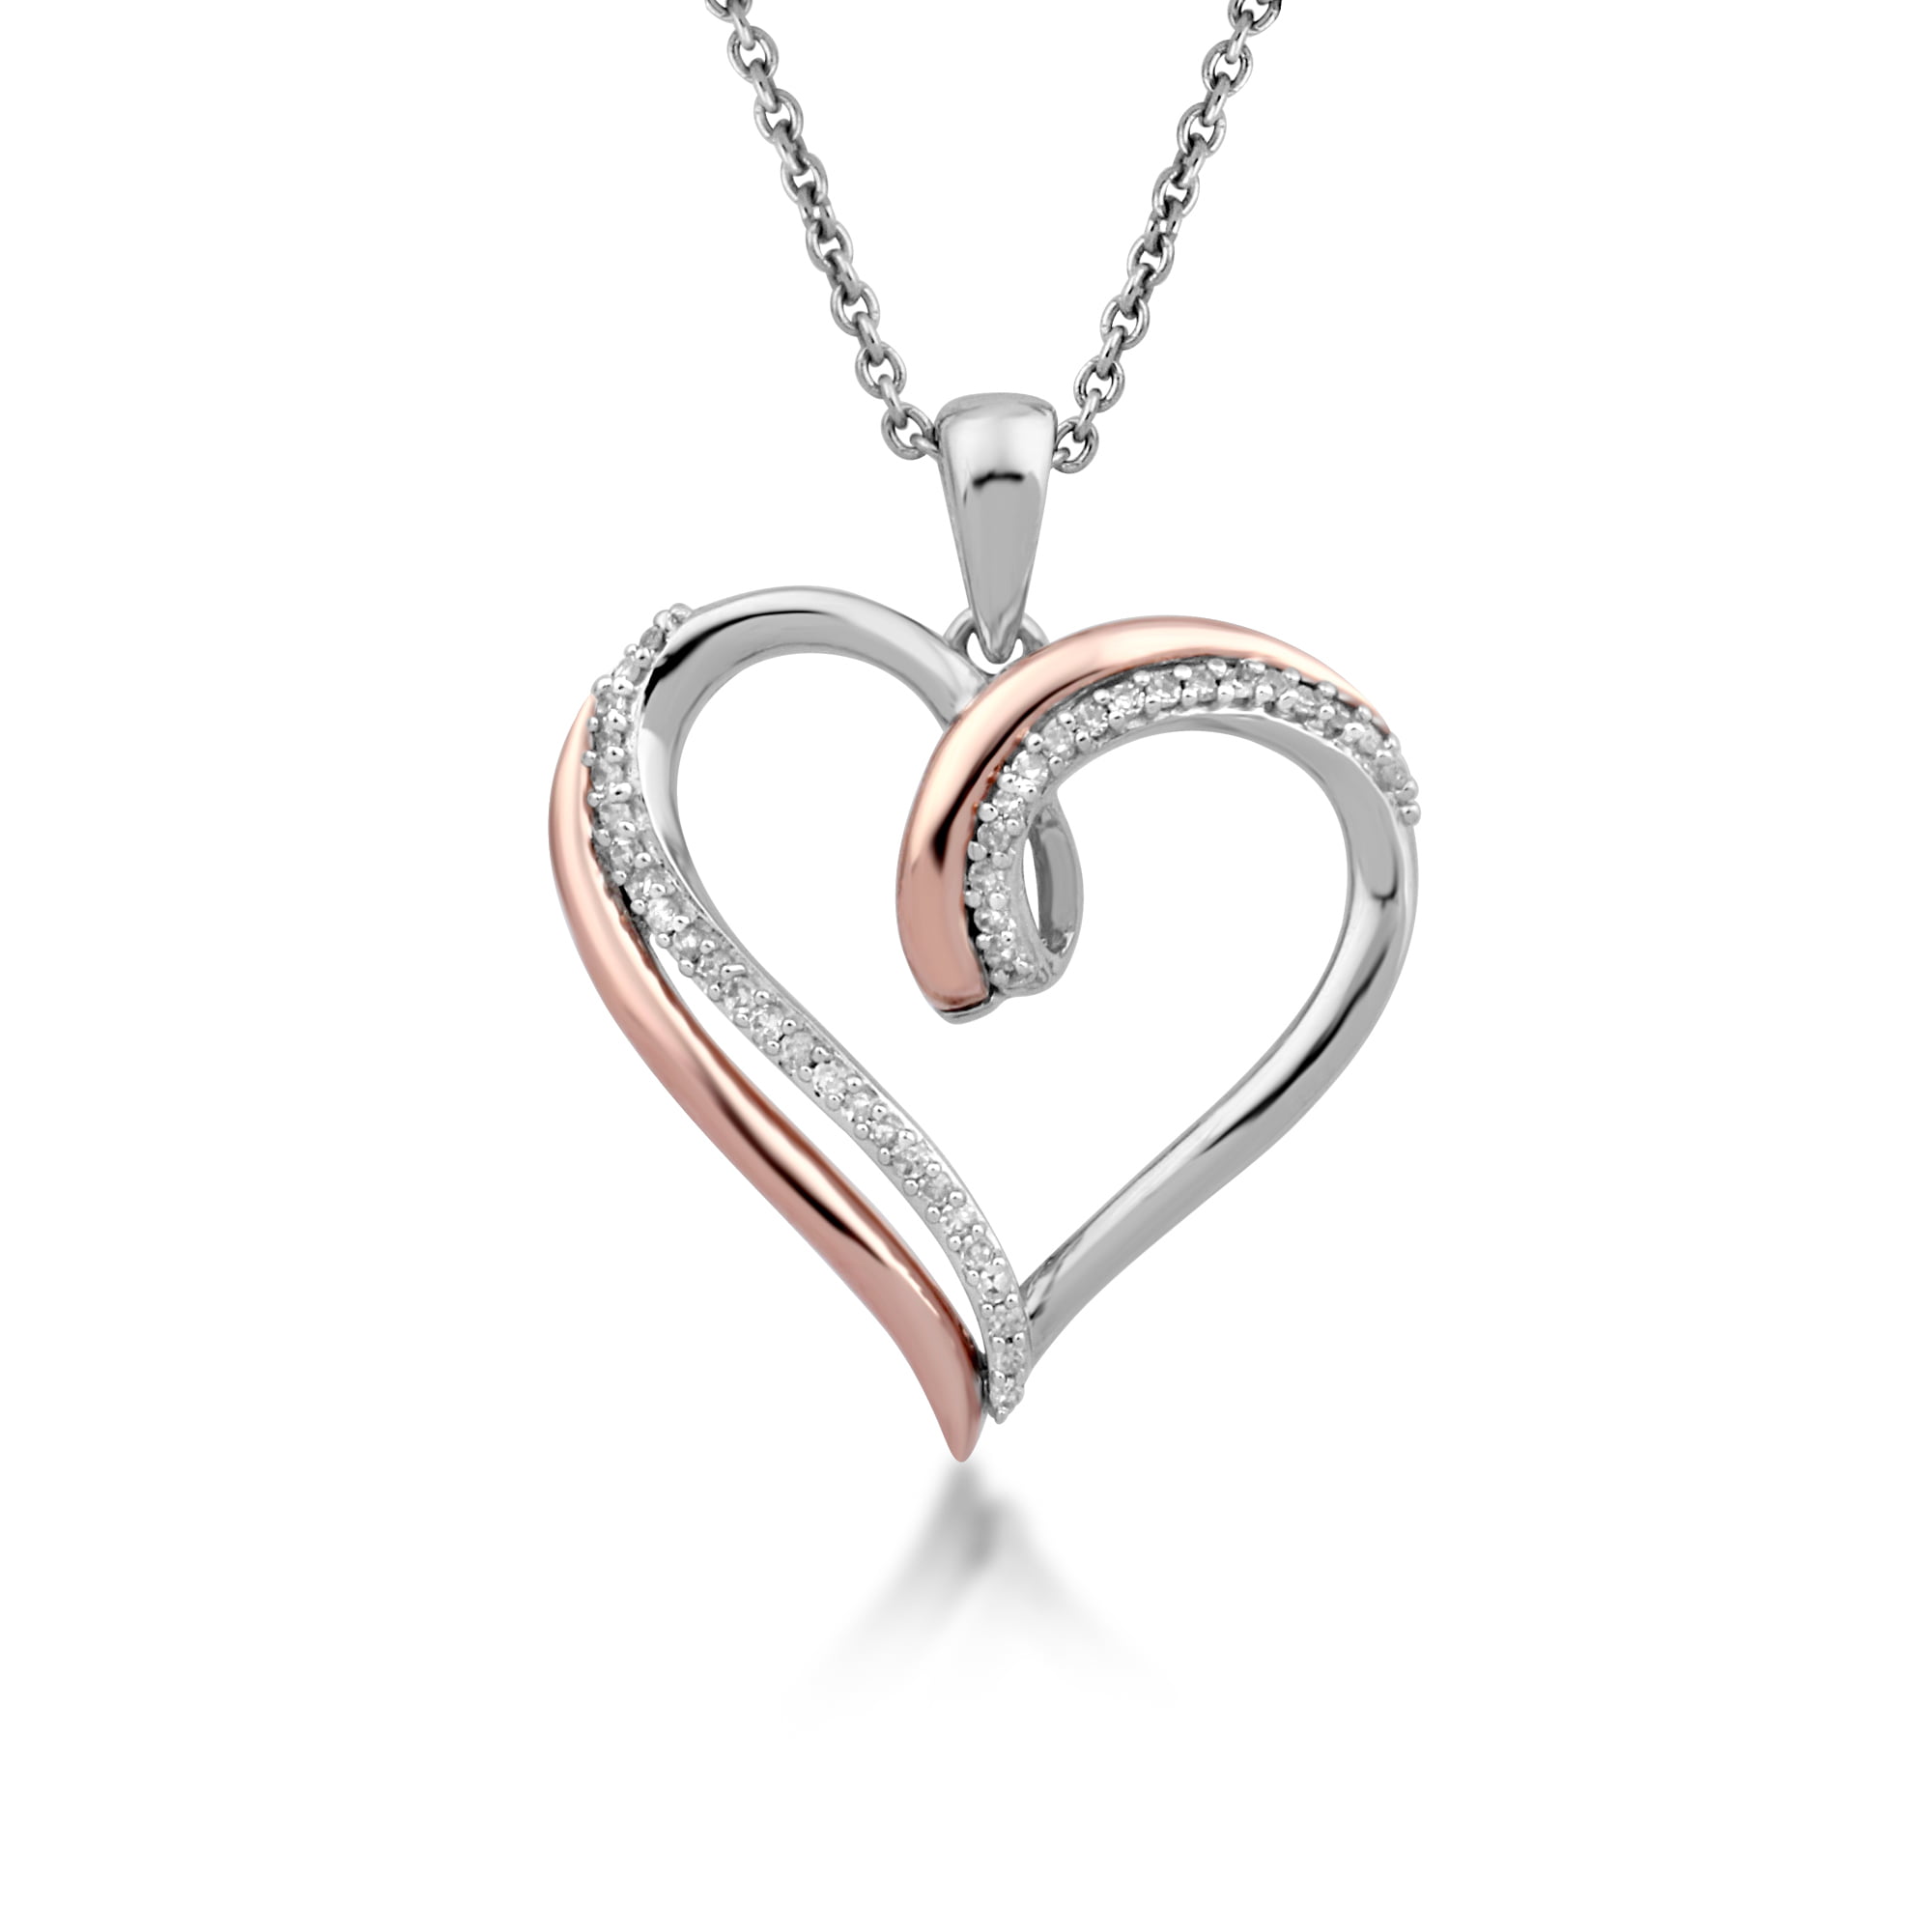 LOVE XMAS BIRTHDAY Heart Necklace Gifts present for her Girl Wife Daughter lady